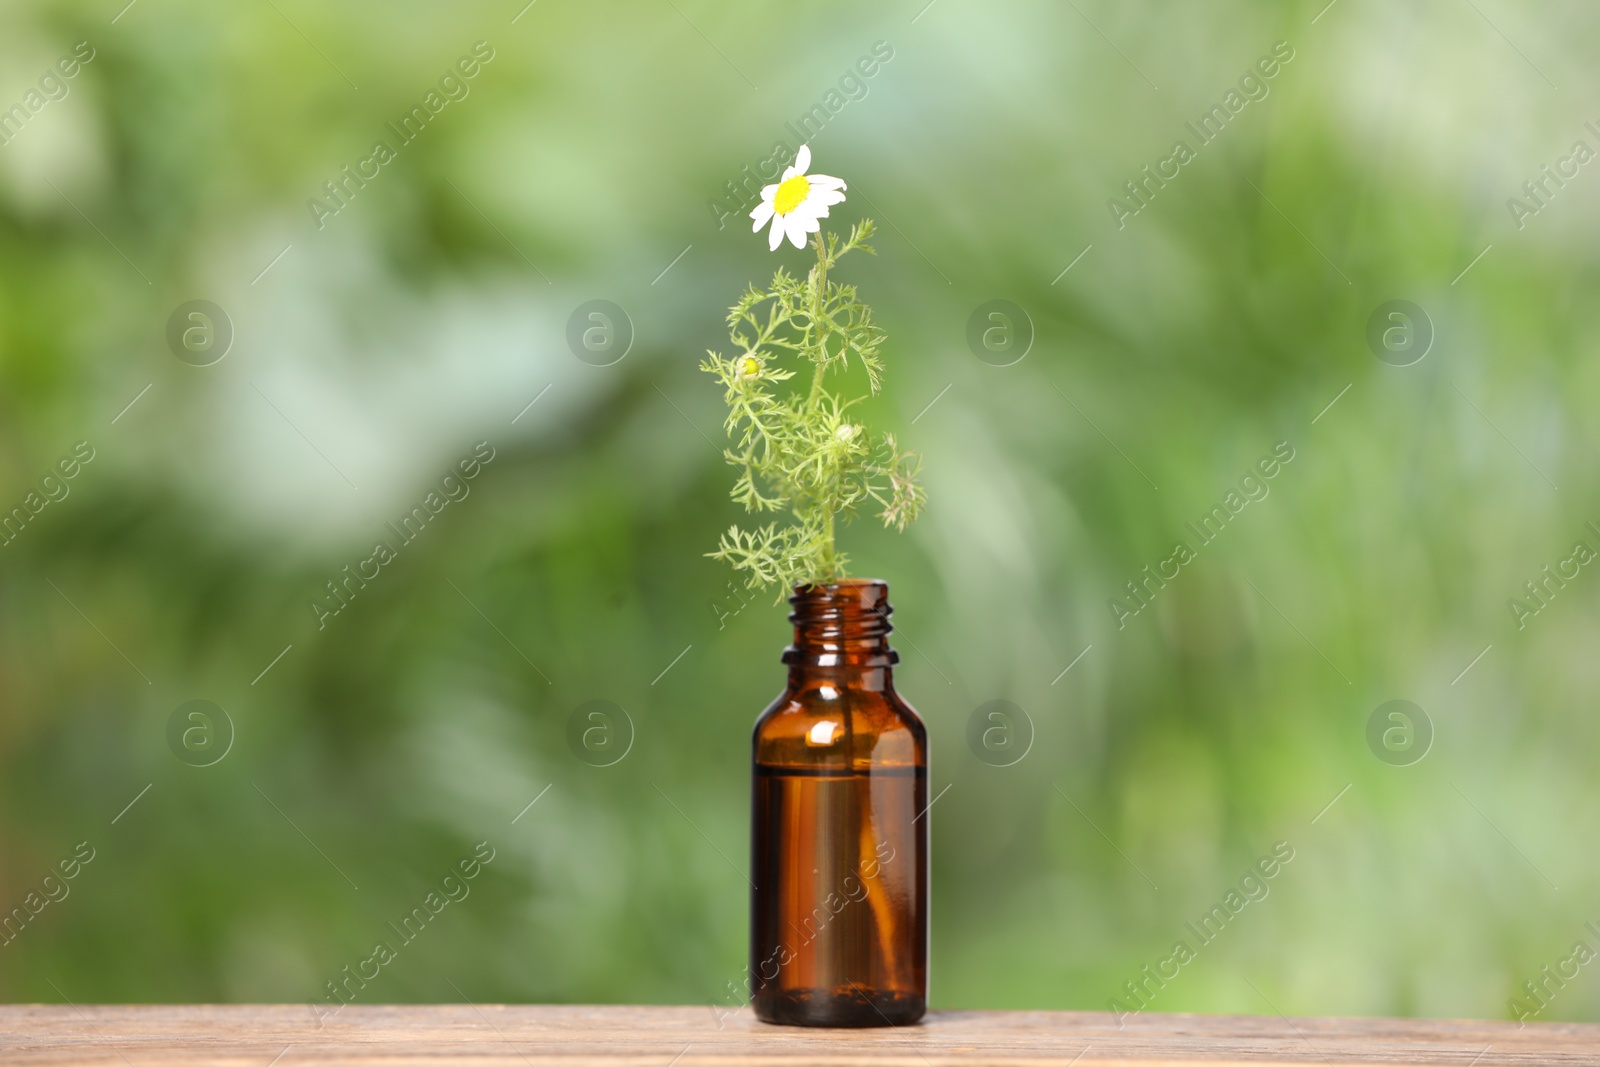 Photo of Bottle with essential oil and chamomile on wooden table against blurred green background